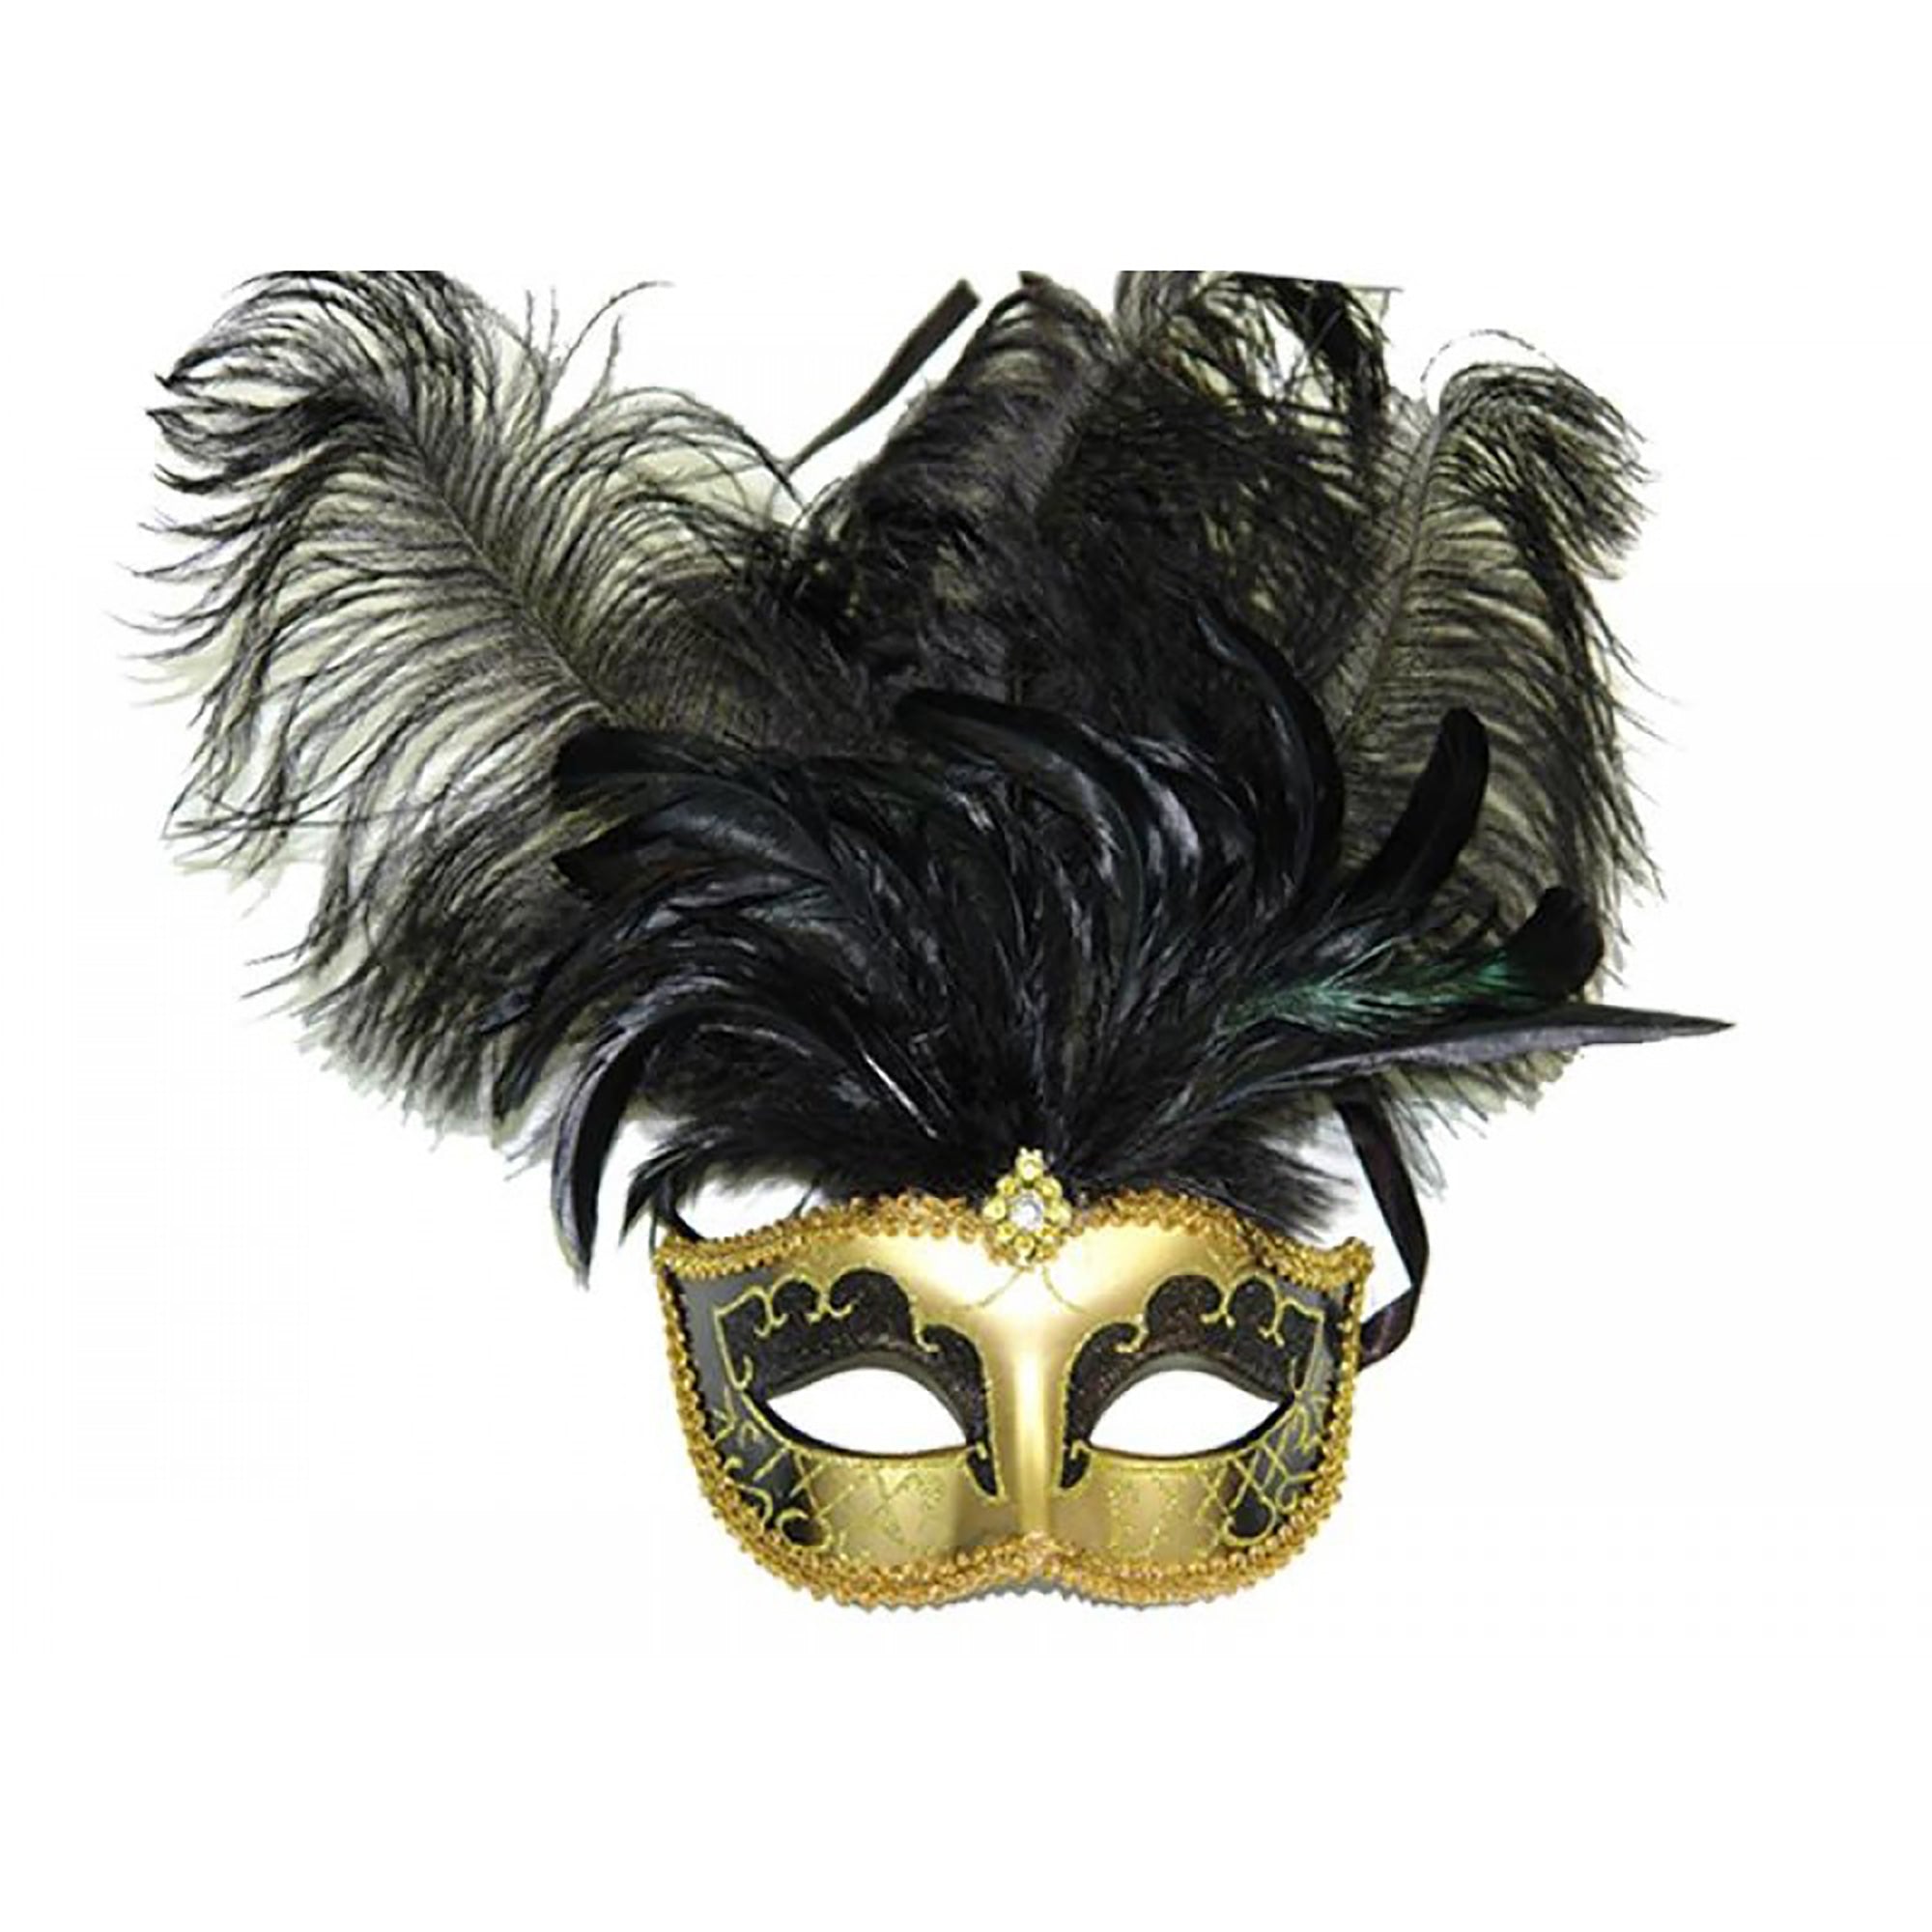 Gold and Black Venetian Mask with Ostrich Feathers, 1 Count